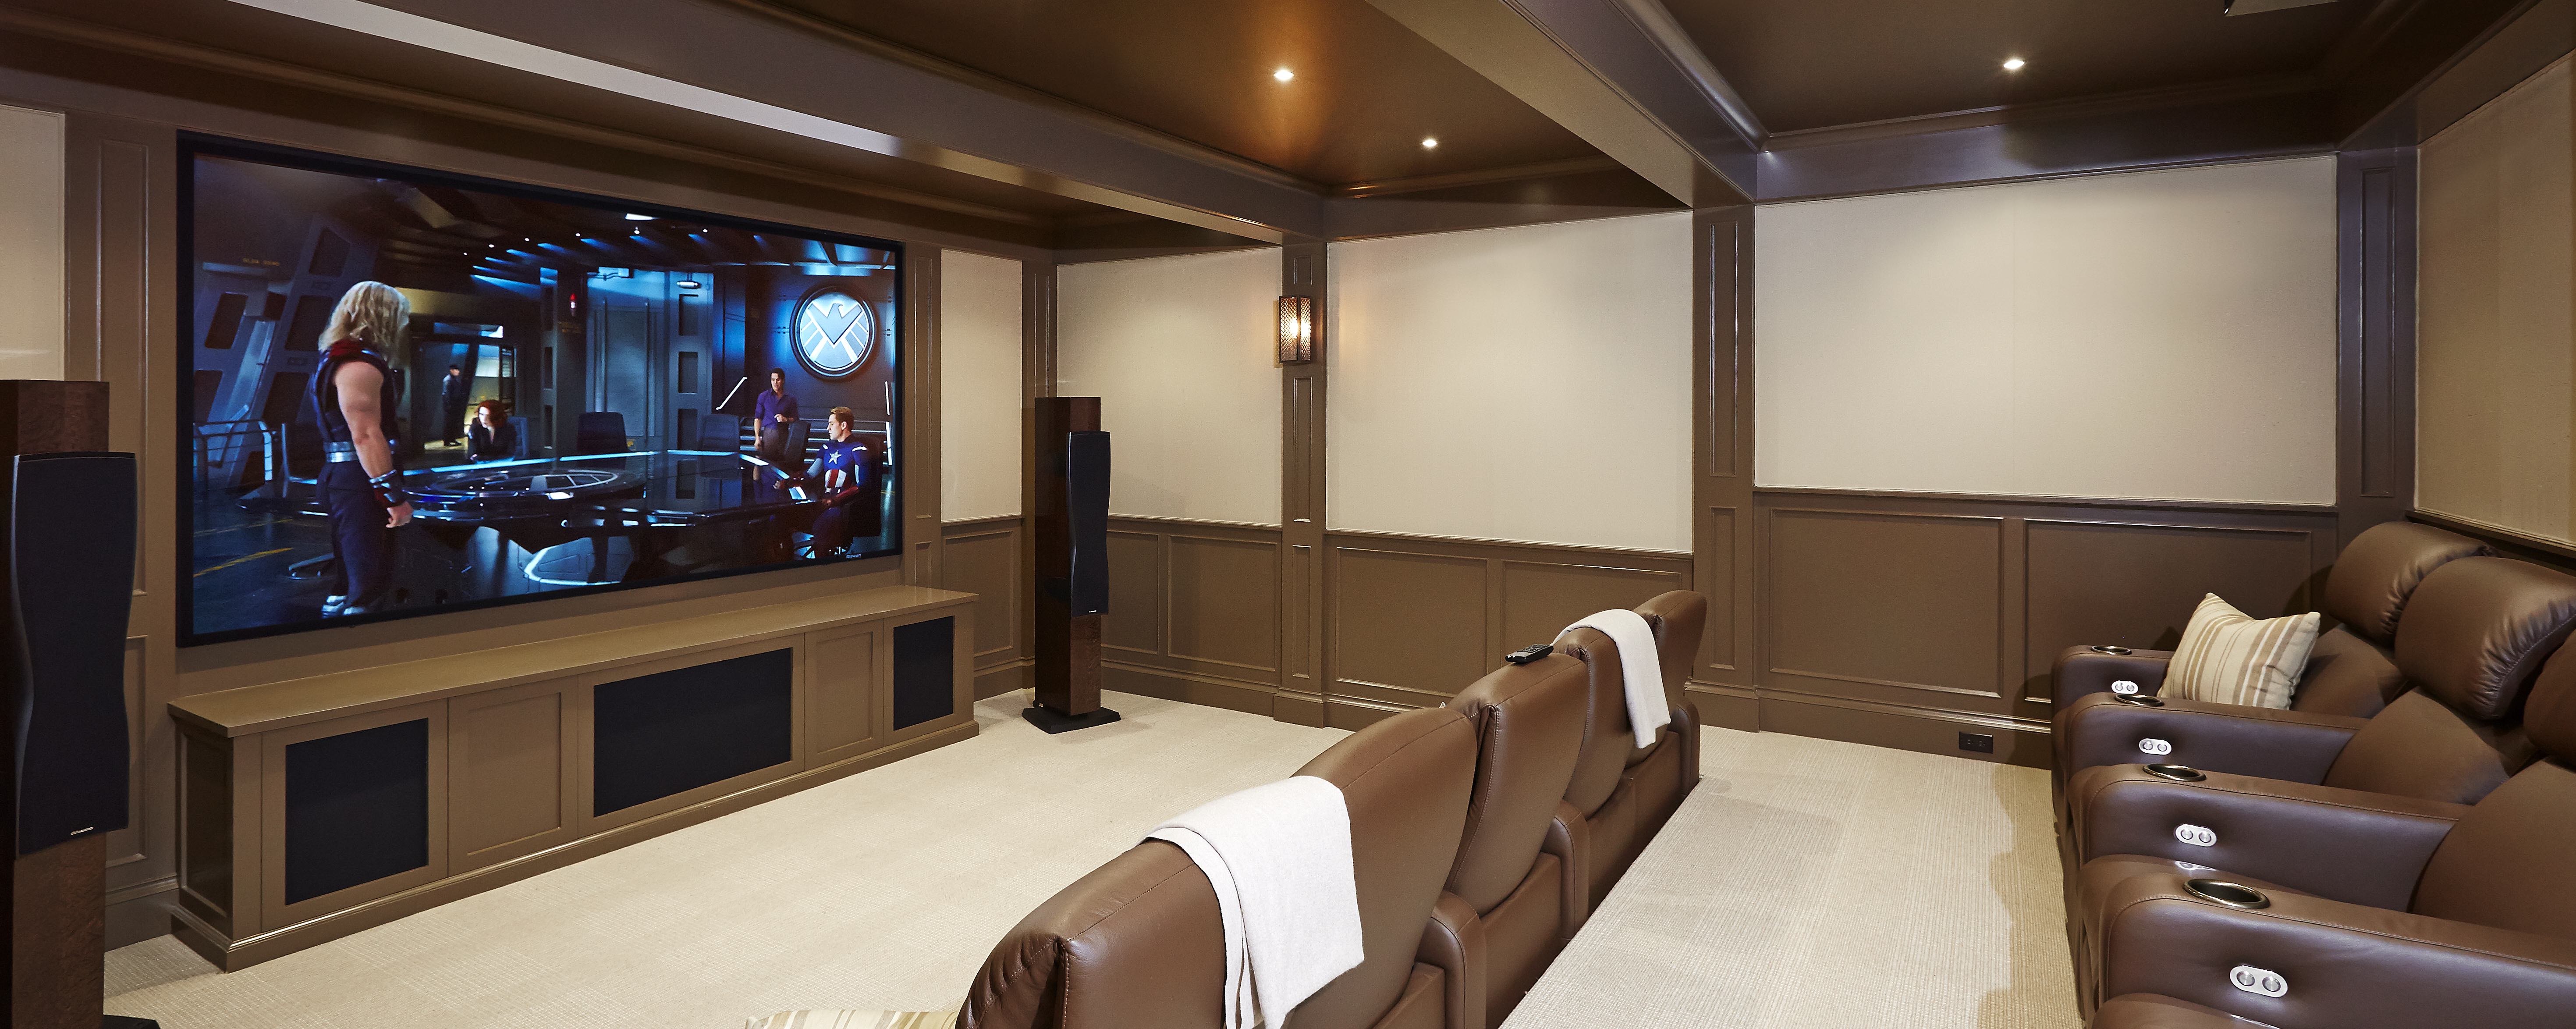 Home Theater Design Services in Long Island and NYC ...